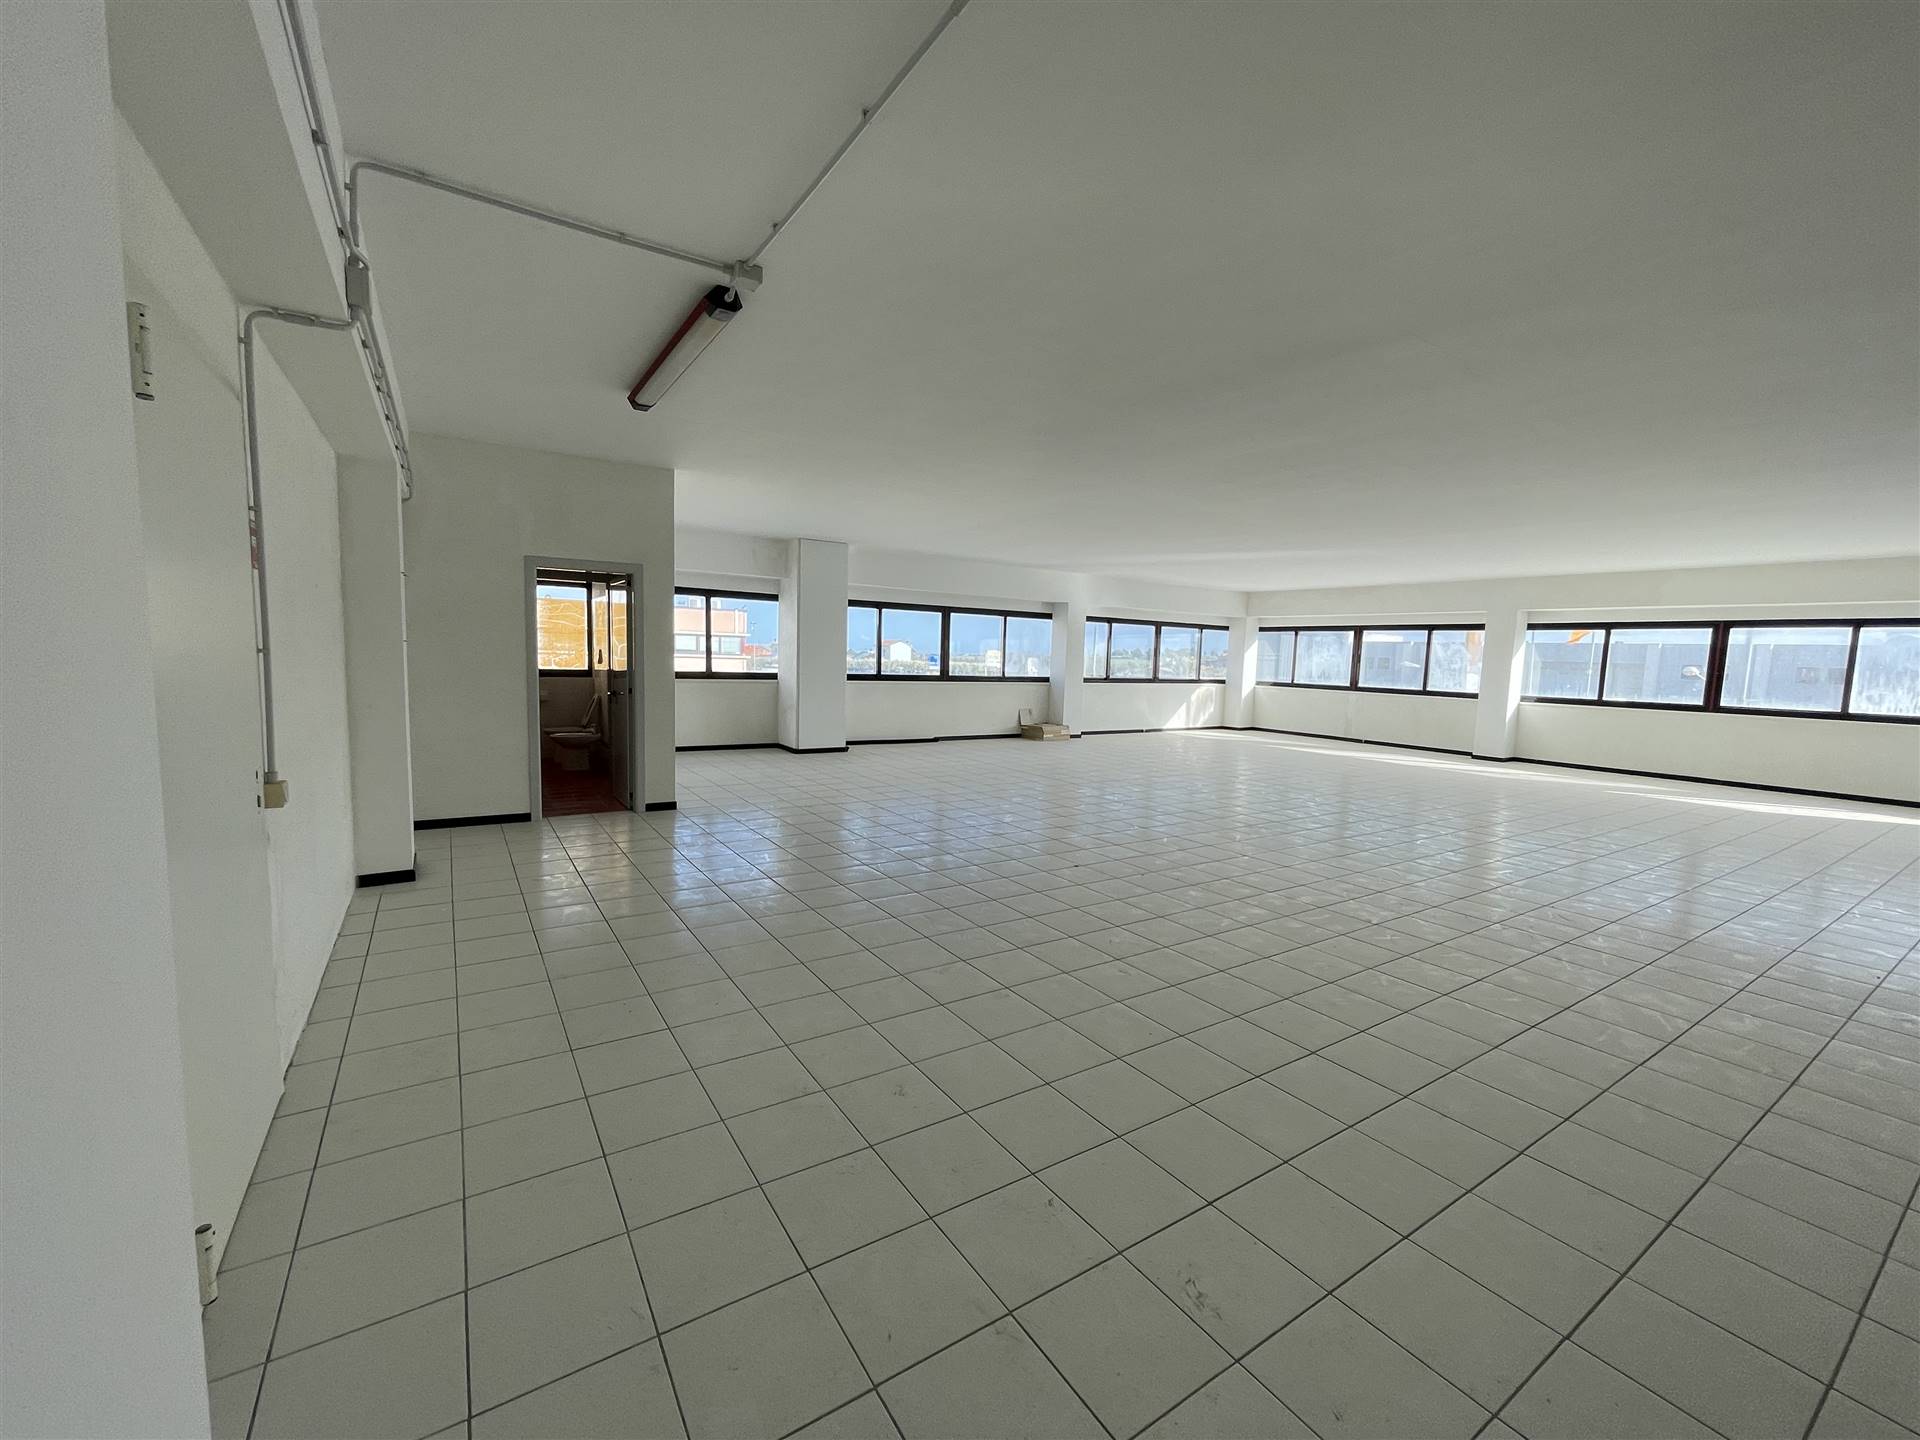 PERIFERIA, VASTO, Office for rent of 3 Sq. mt., Energetic class: G, Epi: 0 kwh/m3 year, placed at 1° on 1, composed by: , 2 Bathrooms, Price: € 1,700